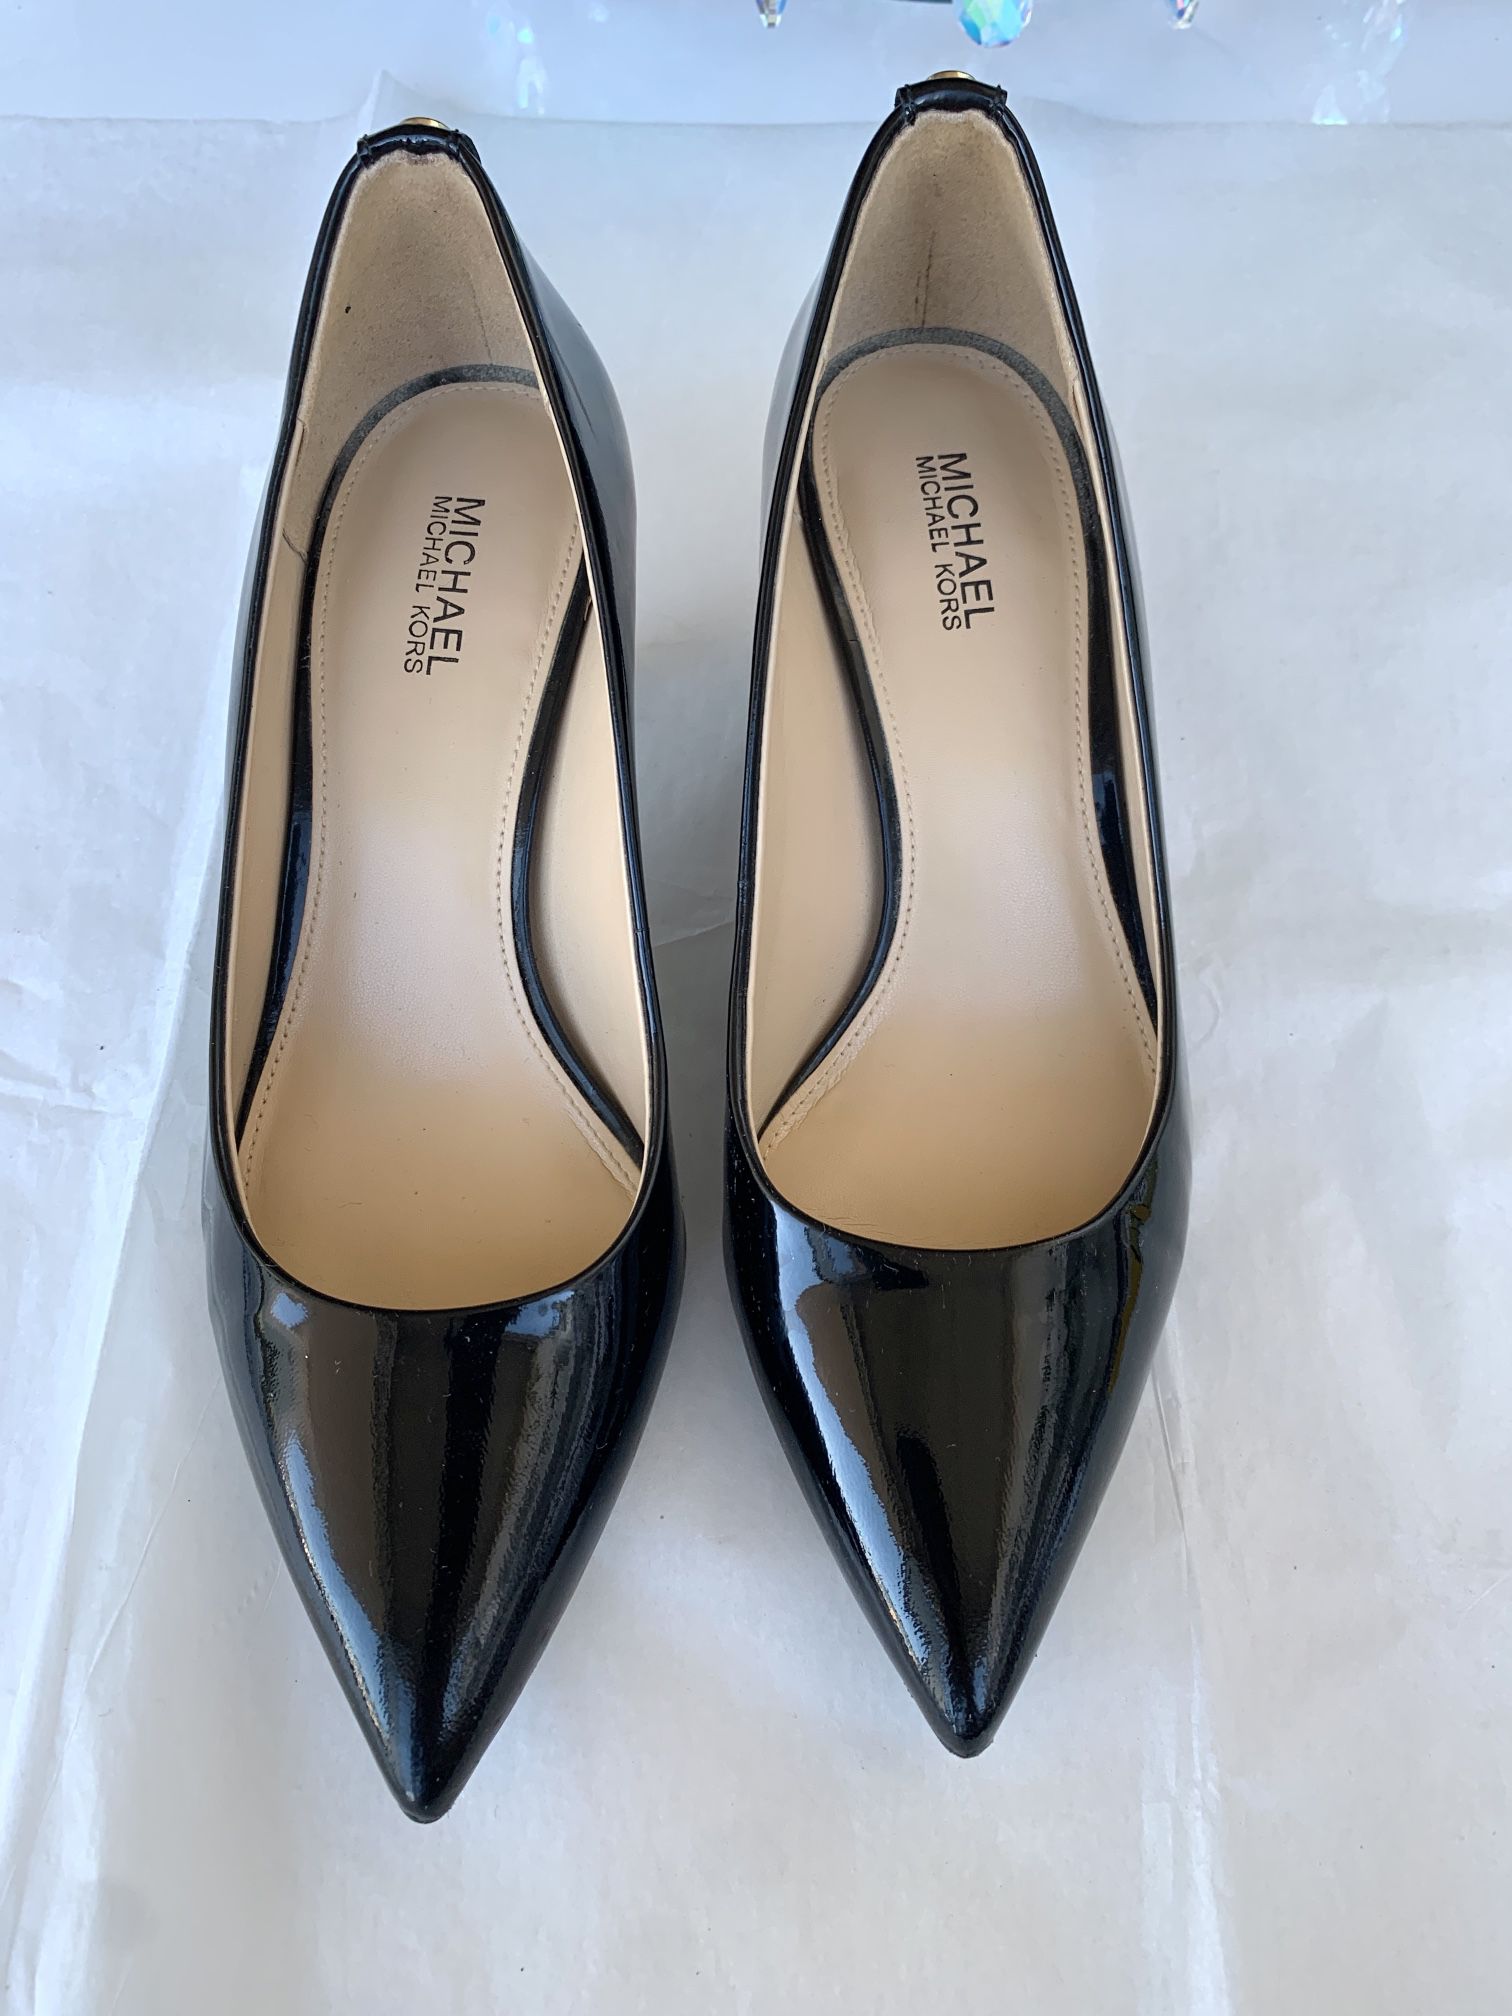 Michael Kors Black Patent Leather Pumps, Pointed-Toes Kitten Heels, Size 5